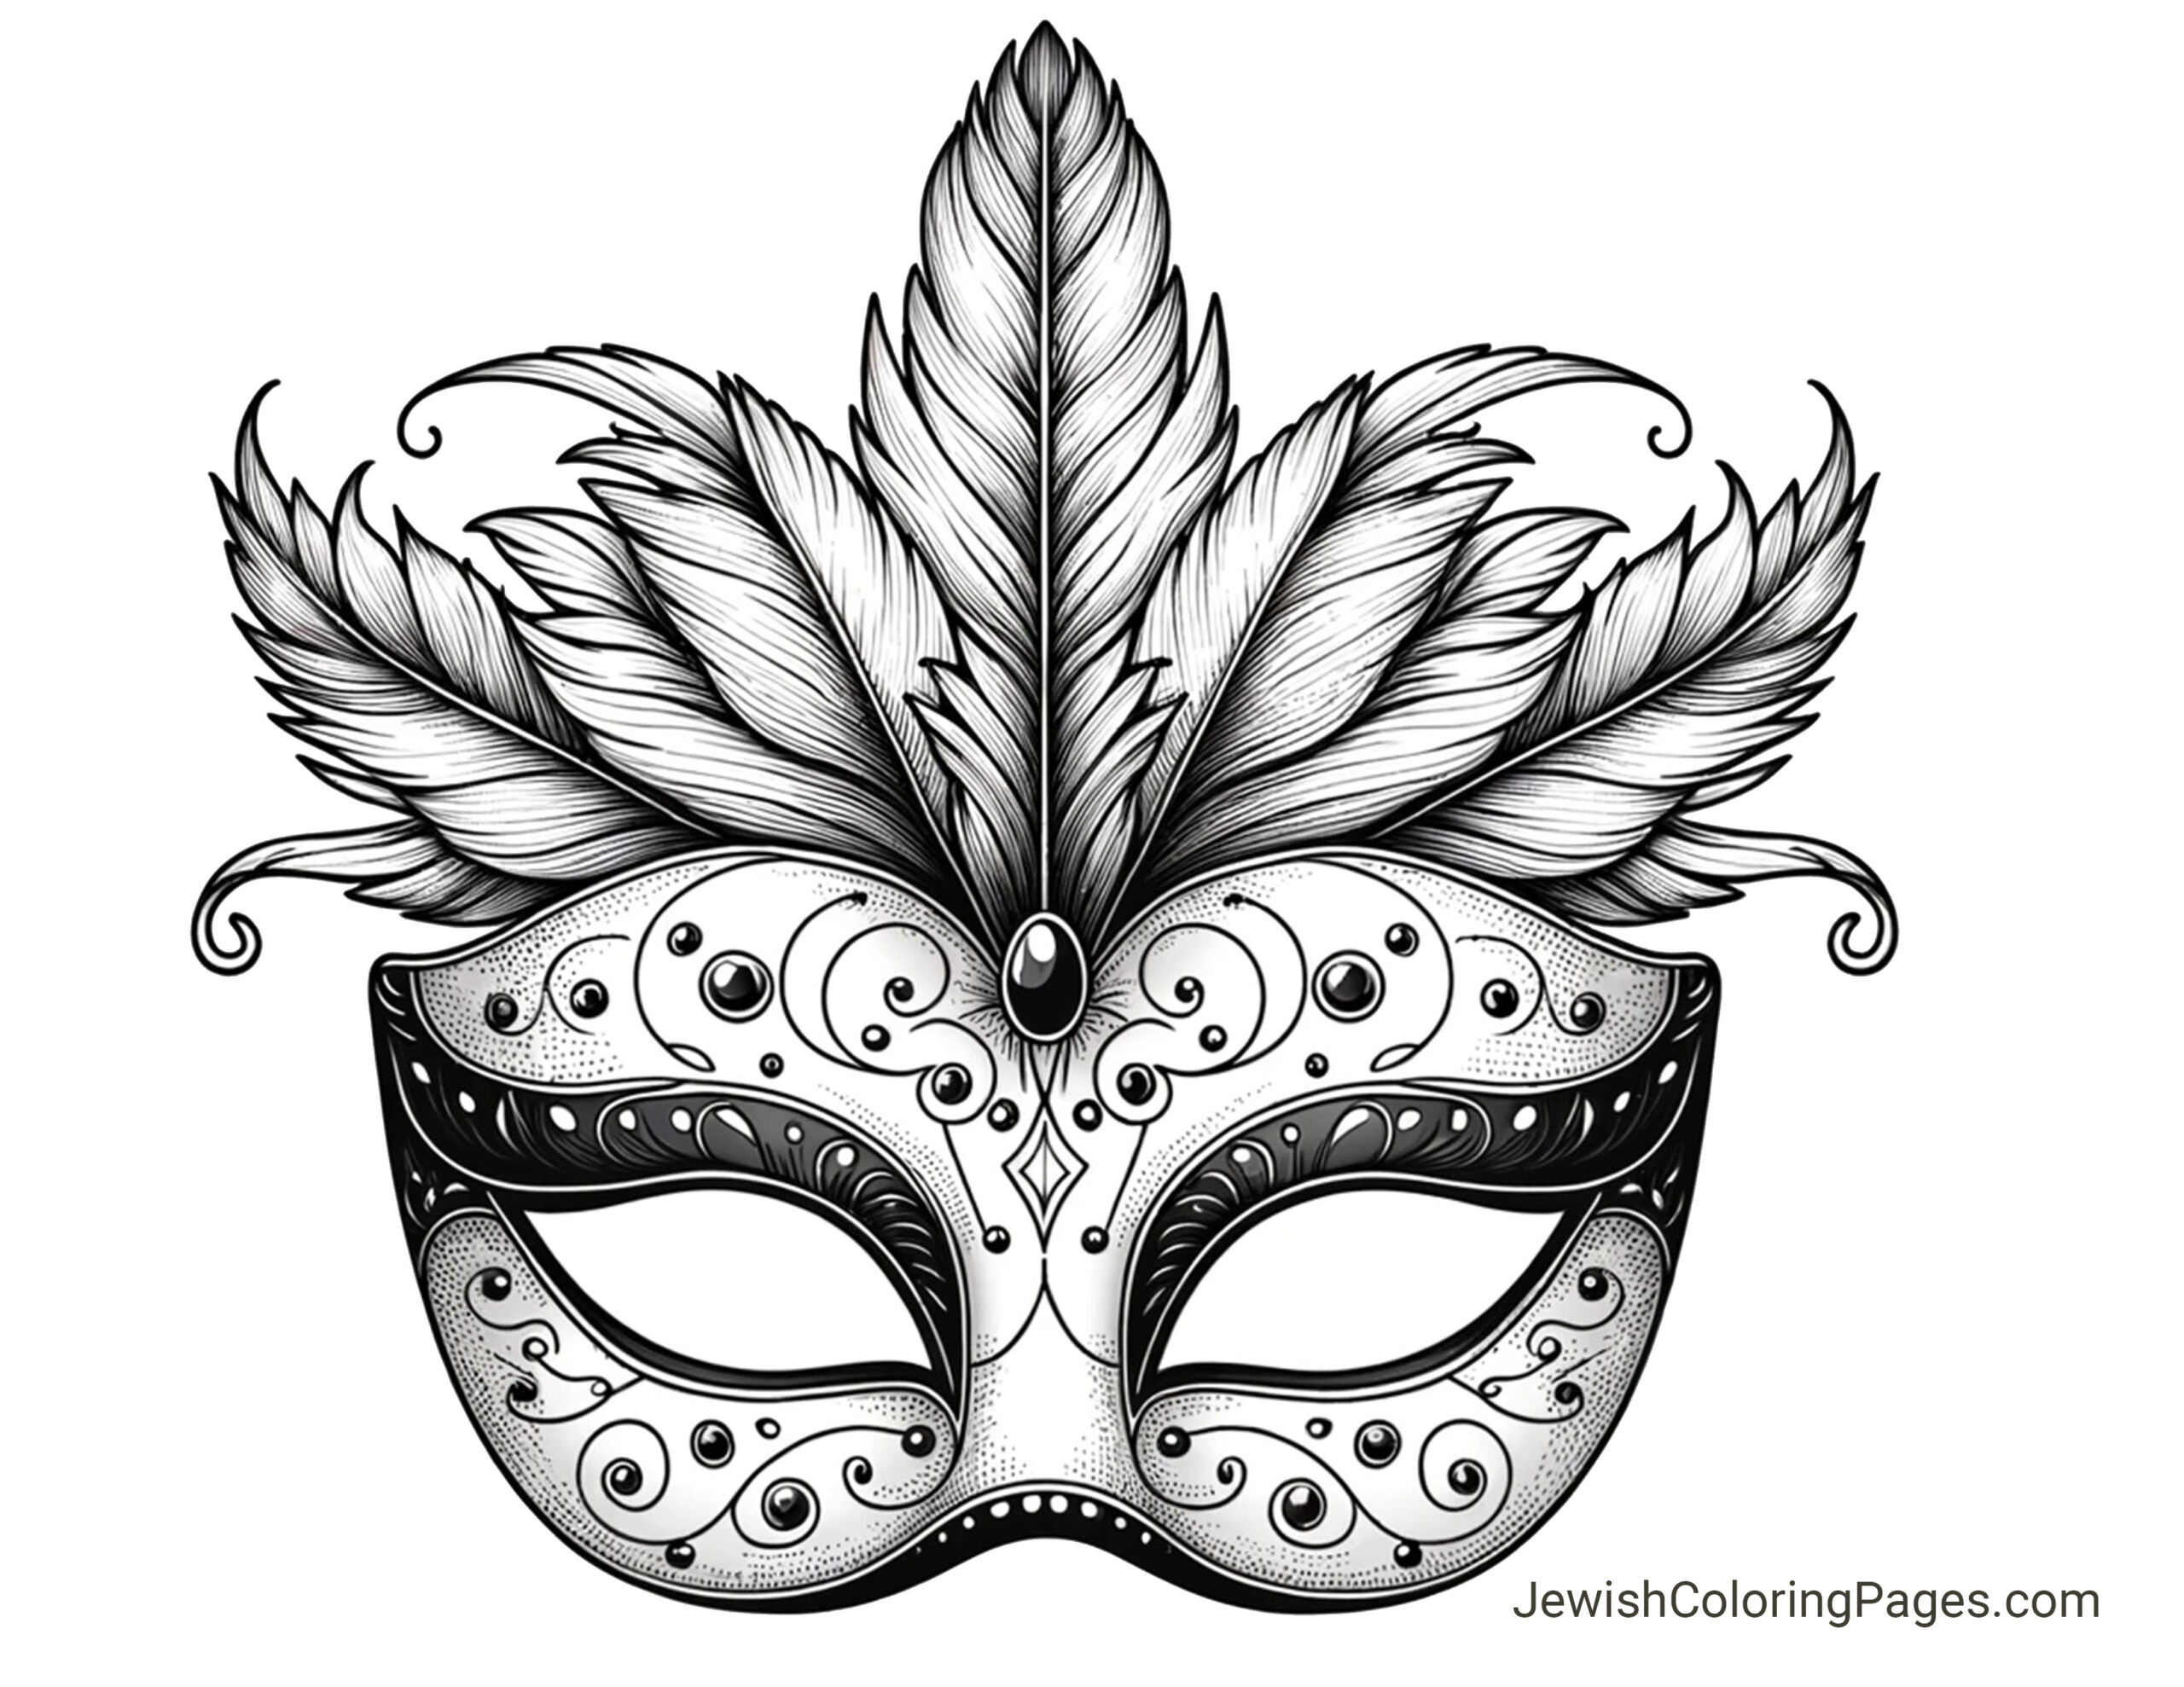 Ornate Feathers Masquerade Mask for Purim Free Printable Coloring Page copy